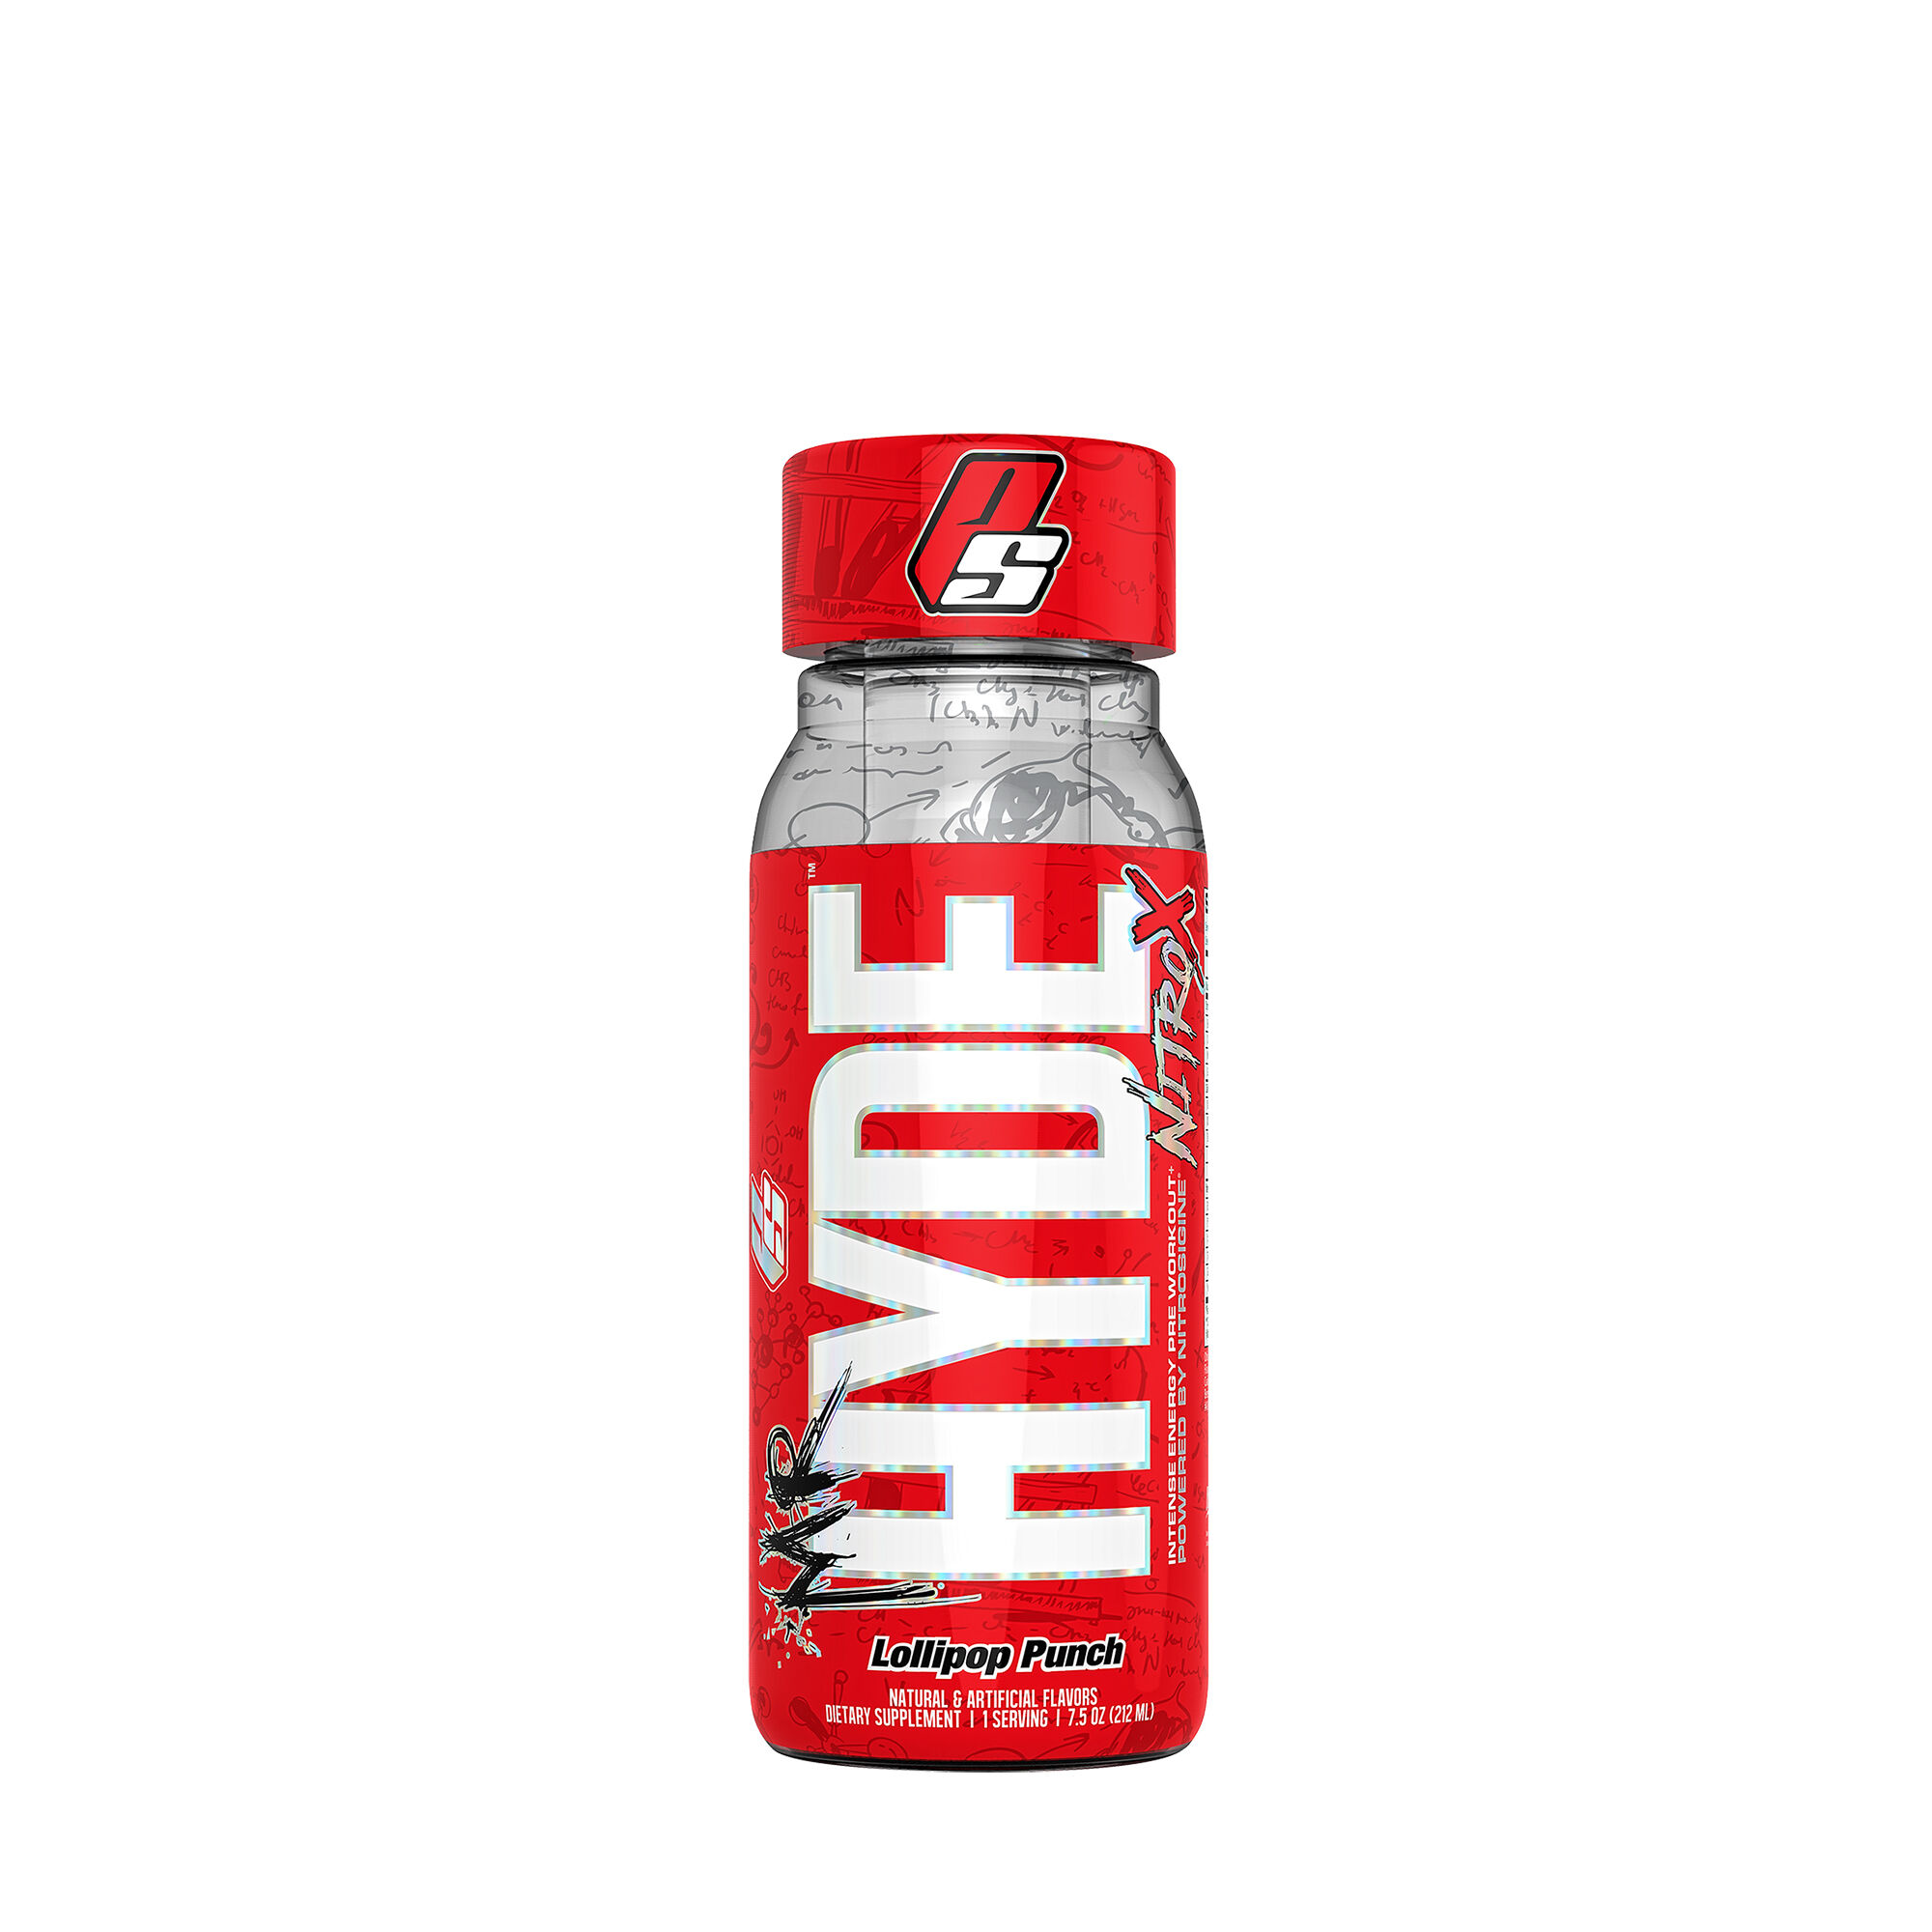 Value Mr hyde pre workout gnc for Workout at Home